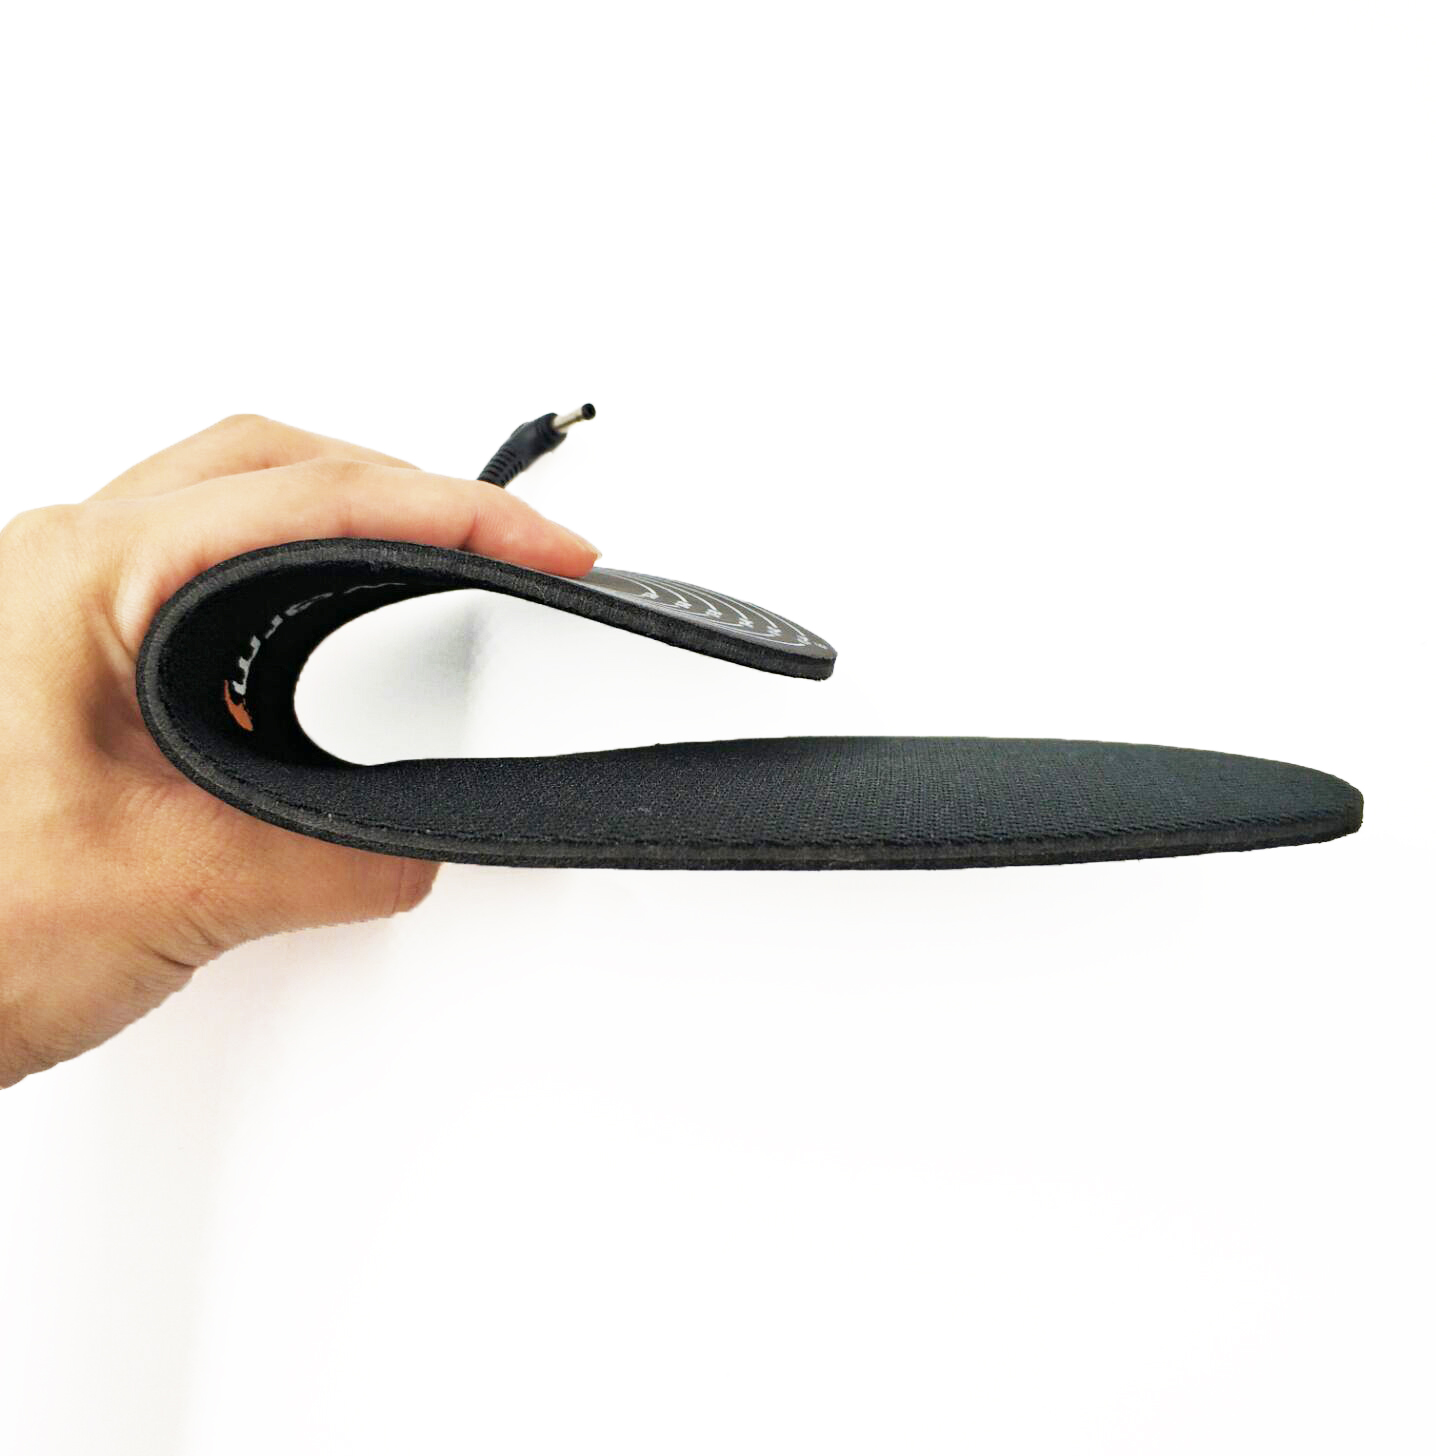 Dr. Warm warm battery powered insoles fit to most shoes for winter-13